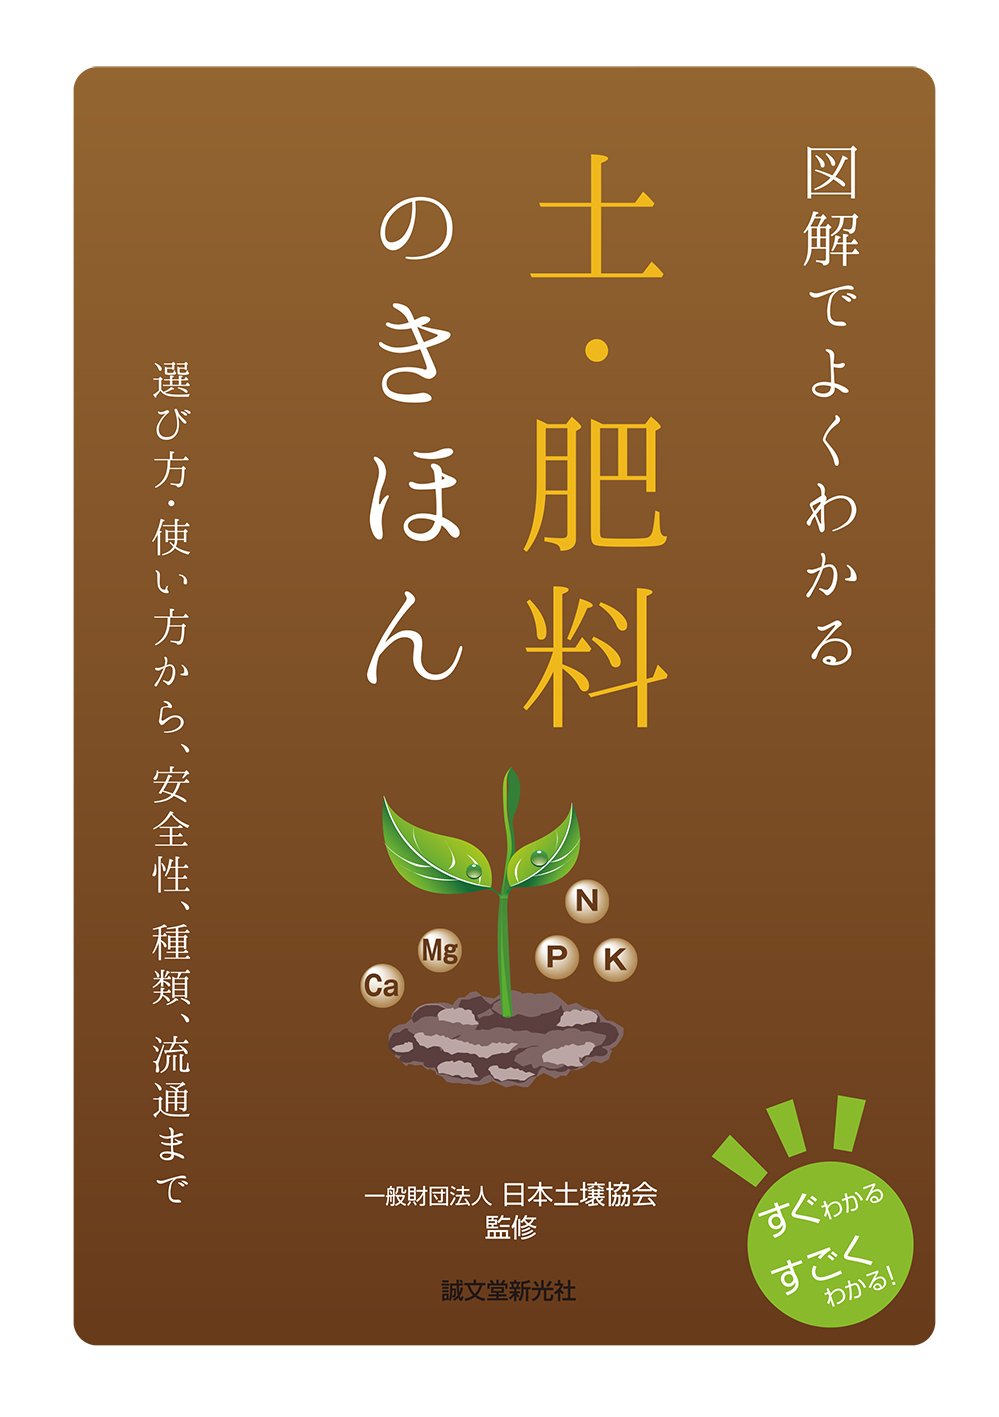 Illustrated guidebook for soil and fertilizer